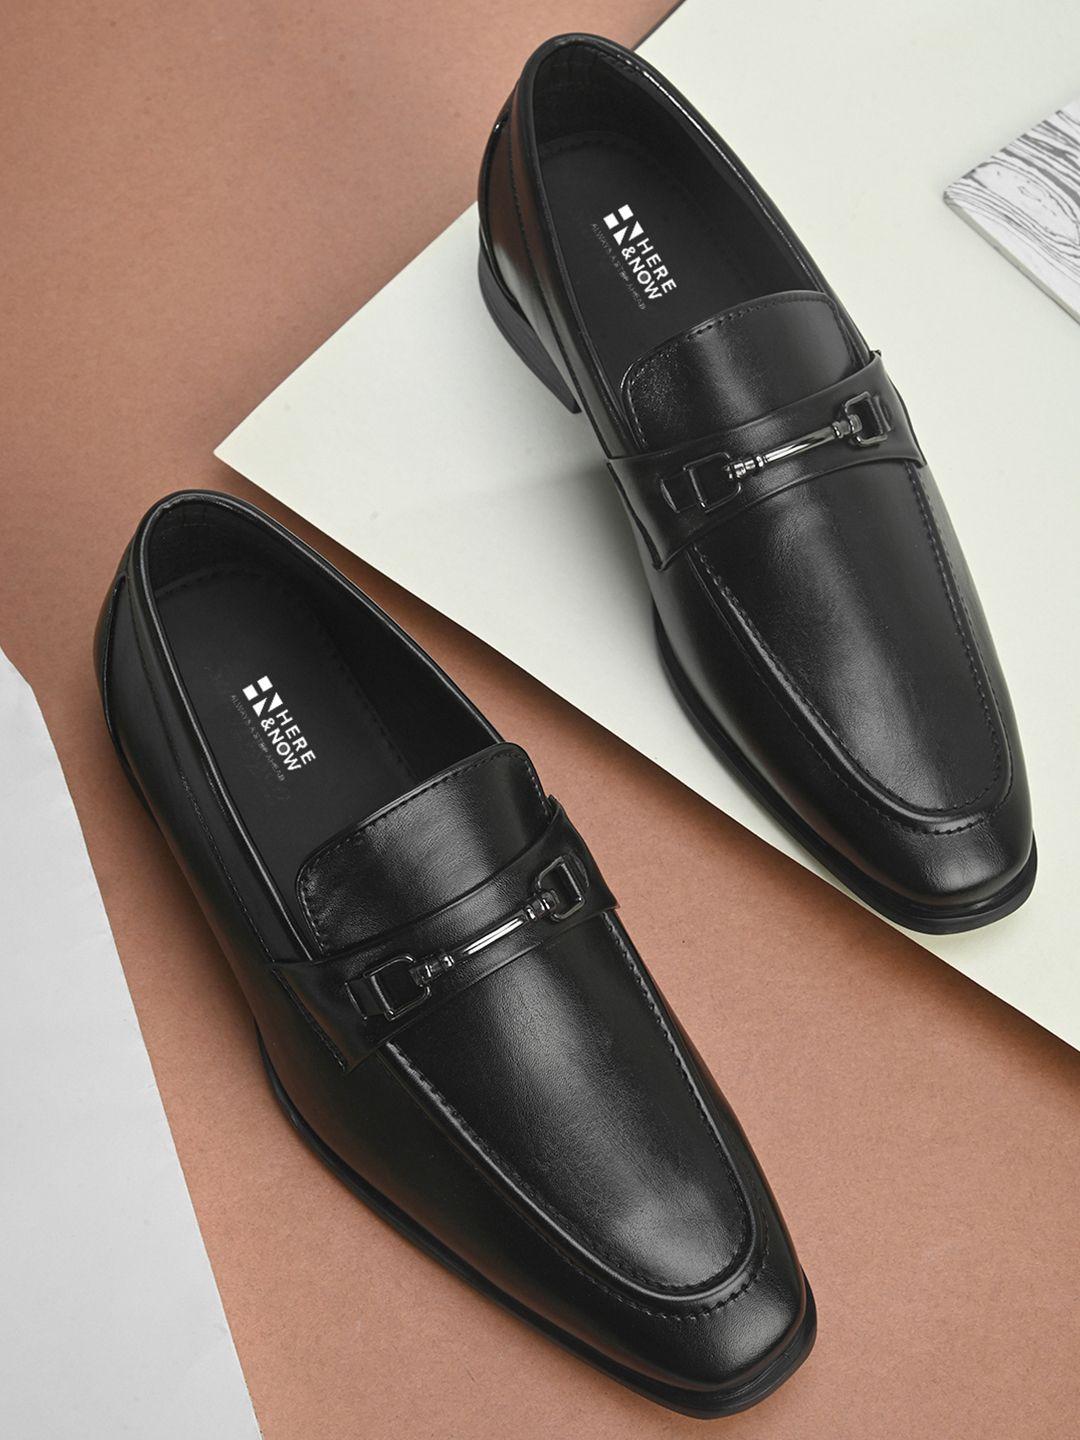 here&now men comfort-fit slip-on loafers